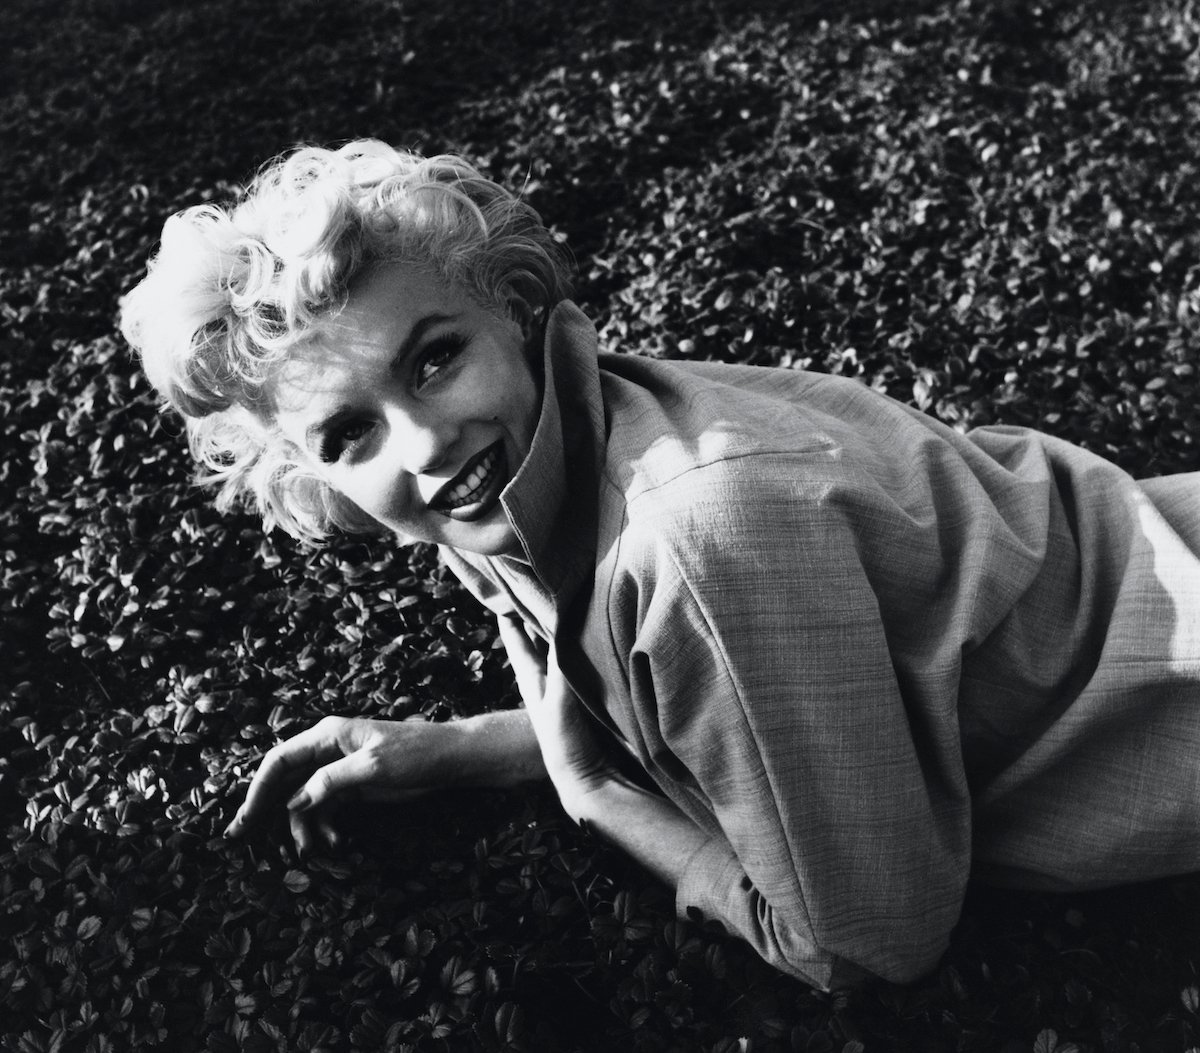 Being Marilyn Monroe Was a ‘Nightmare’ According to ‘Blonde’ Director ...